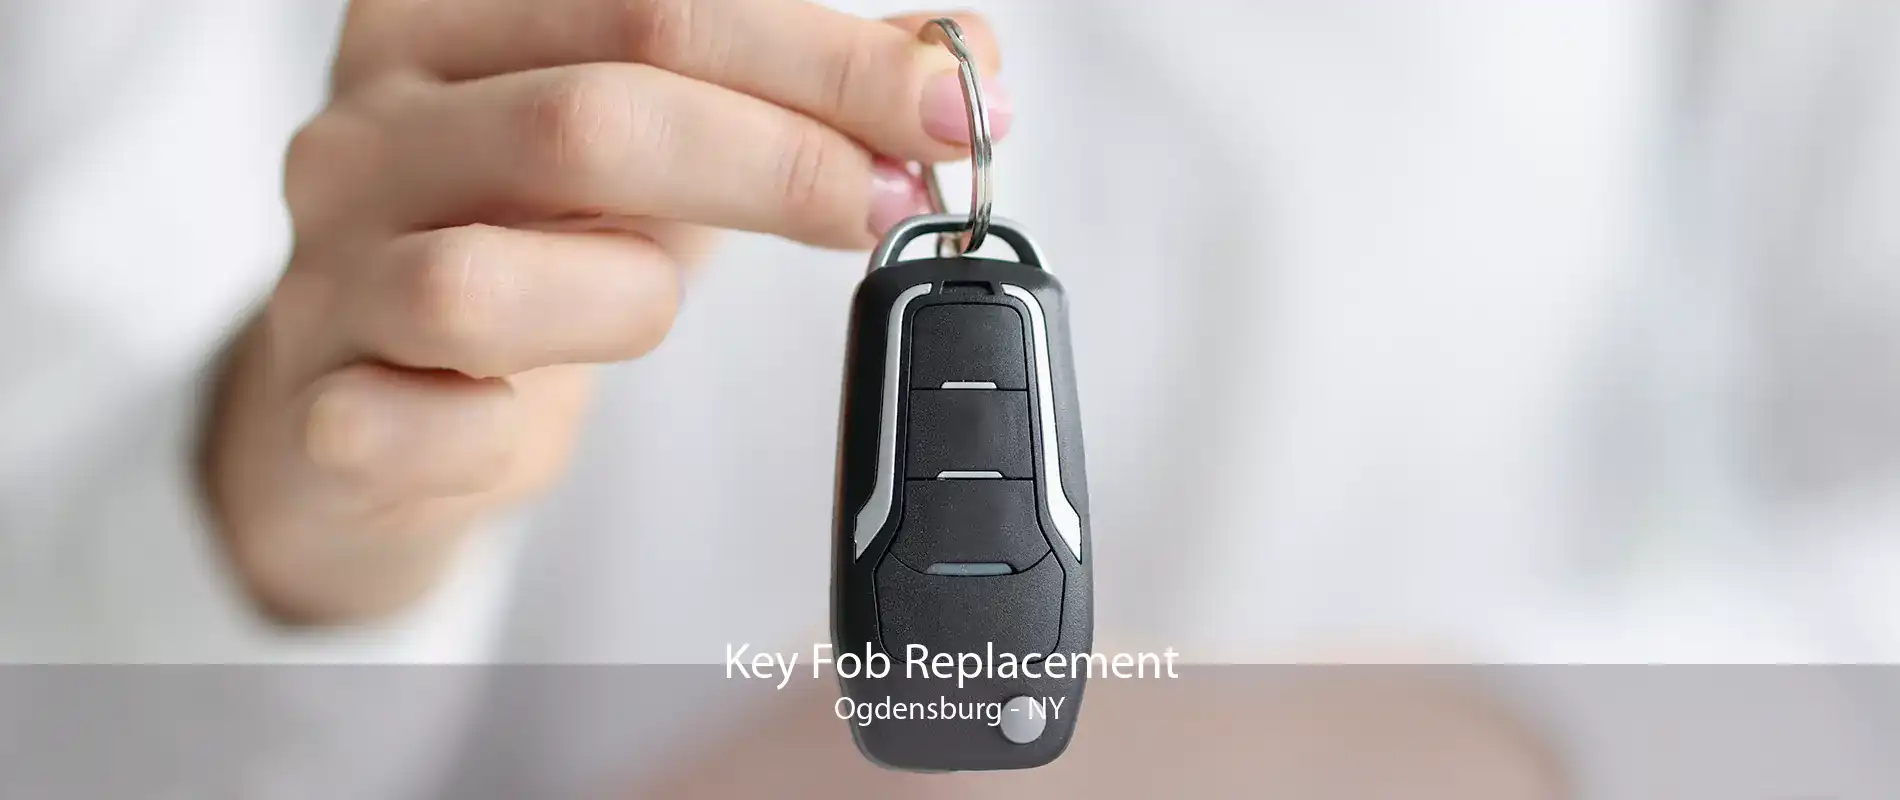 Key Fob Replacement Ogdensburg - NY